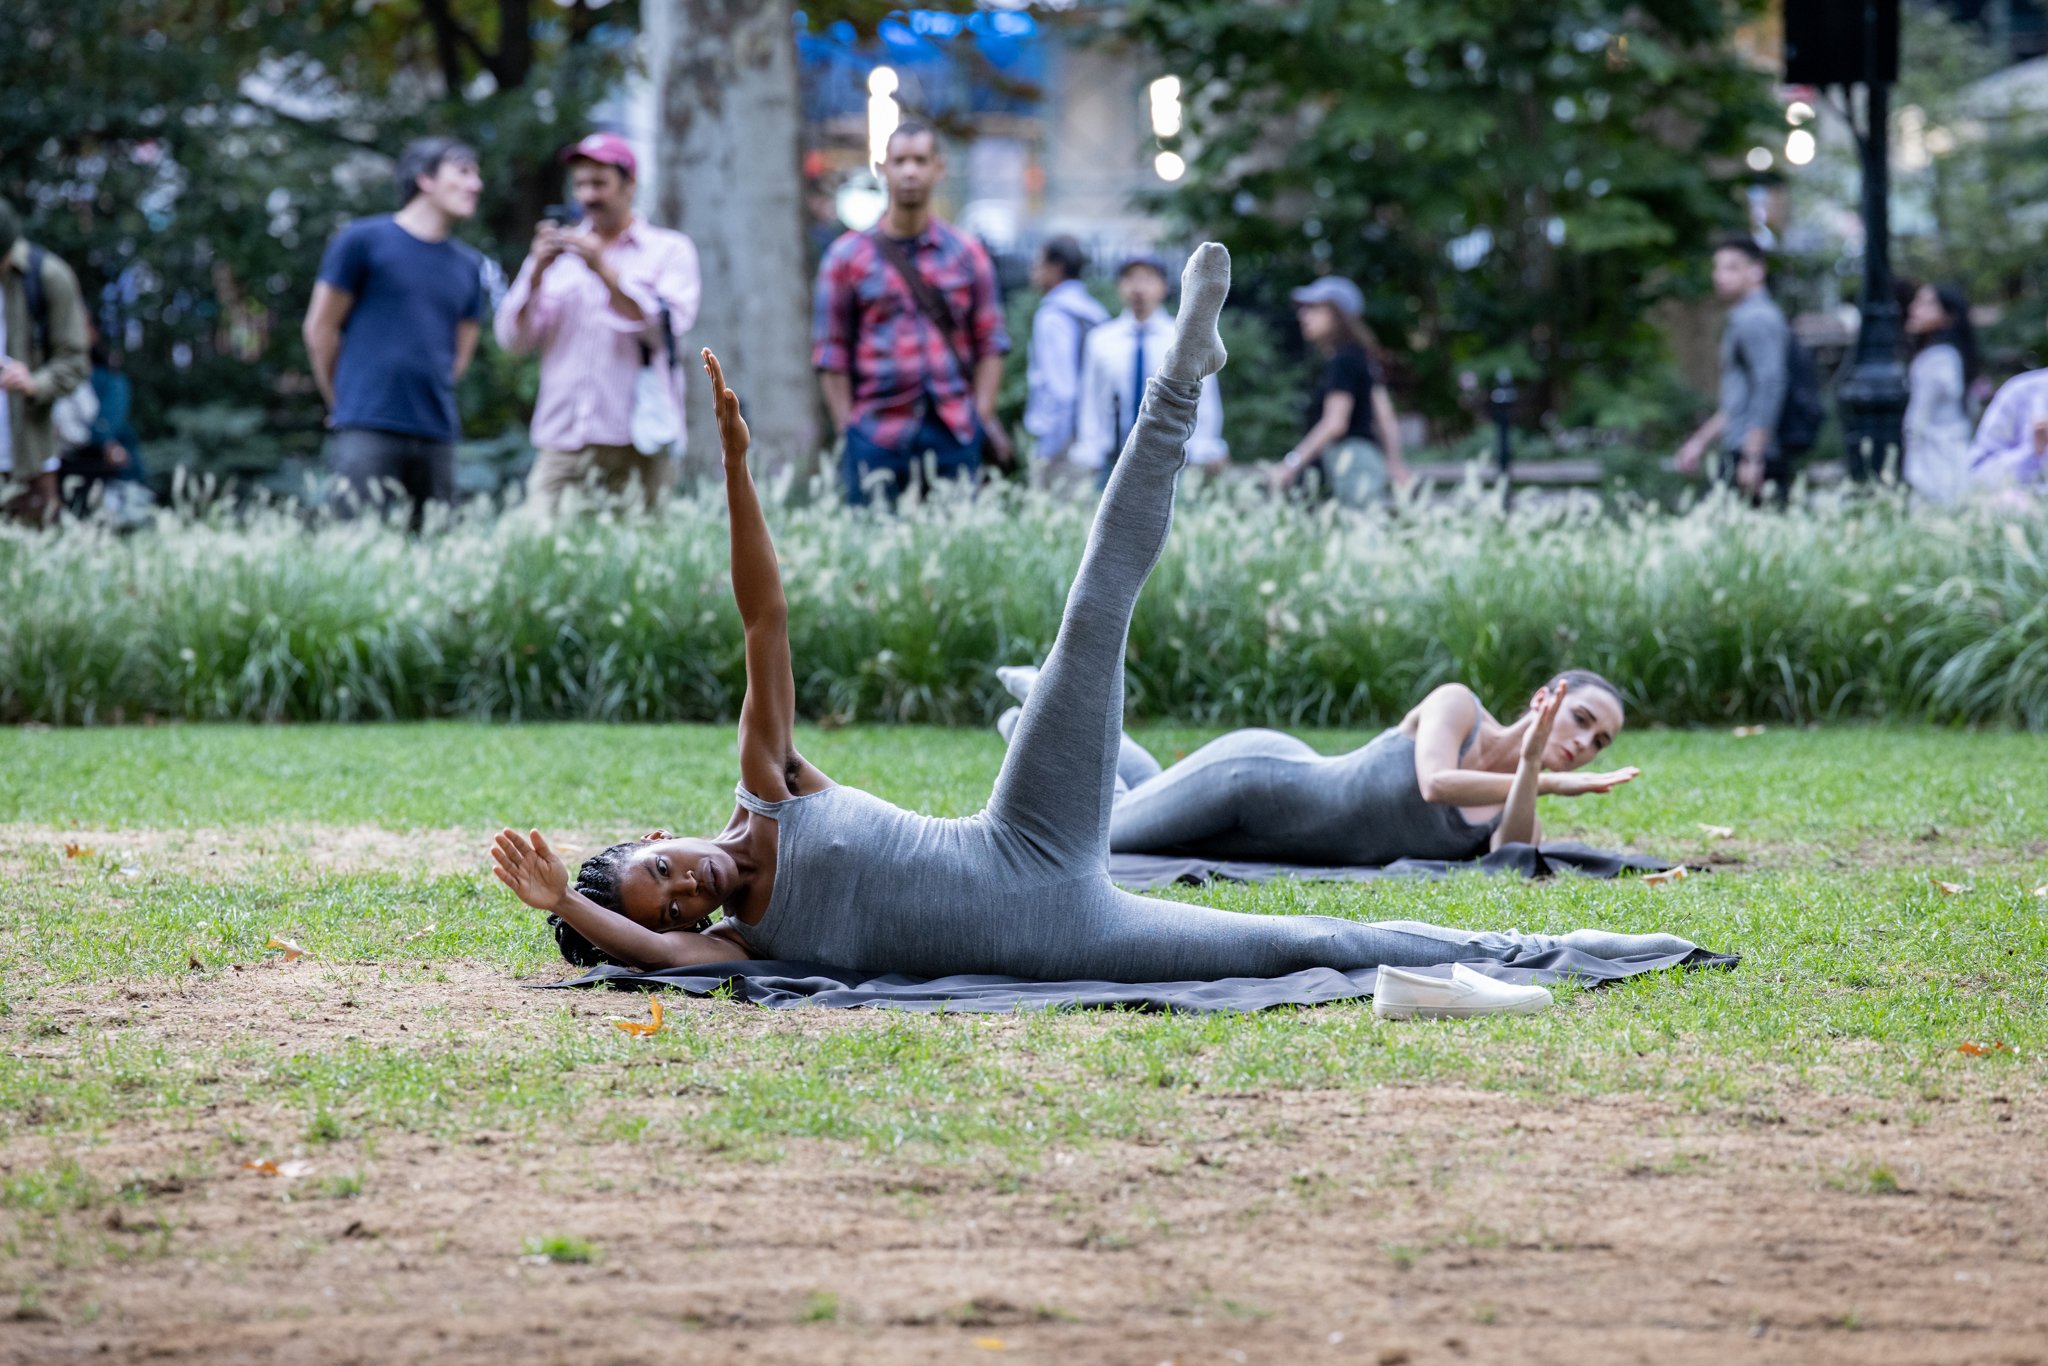  Bria Bacon &amp; Cara McManus in Beau Bree Rhee, Shadow of the Sea, 2022. Performance view, Madison Square Park, September 21, 2022. Presented by The Kitchen in partnership with Madison Square Park Conservancy. Artwork pictured: Cristina Iglesias (S